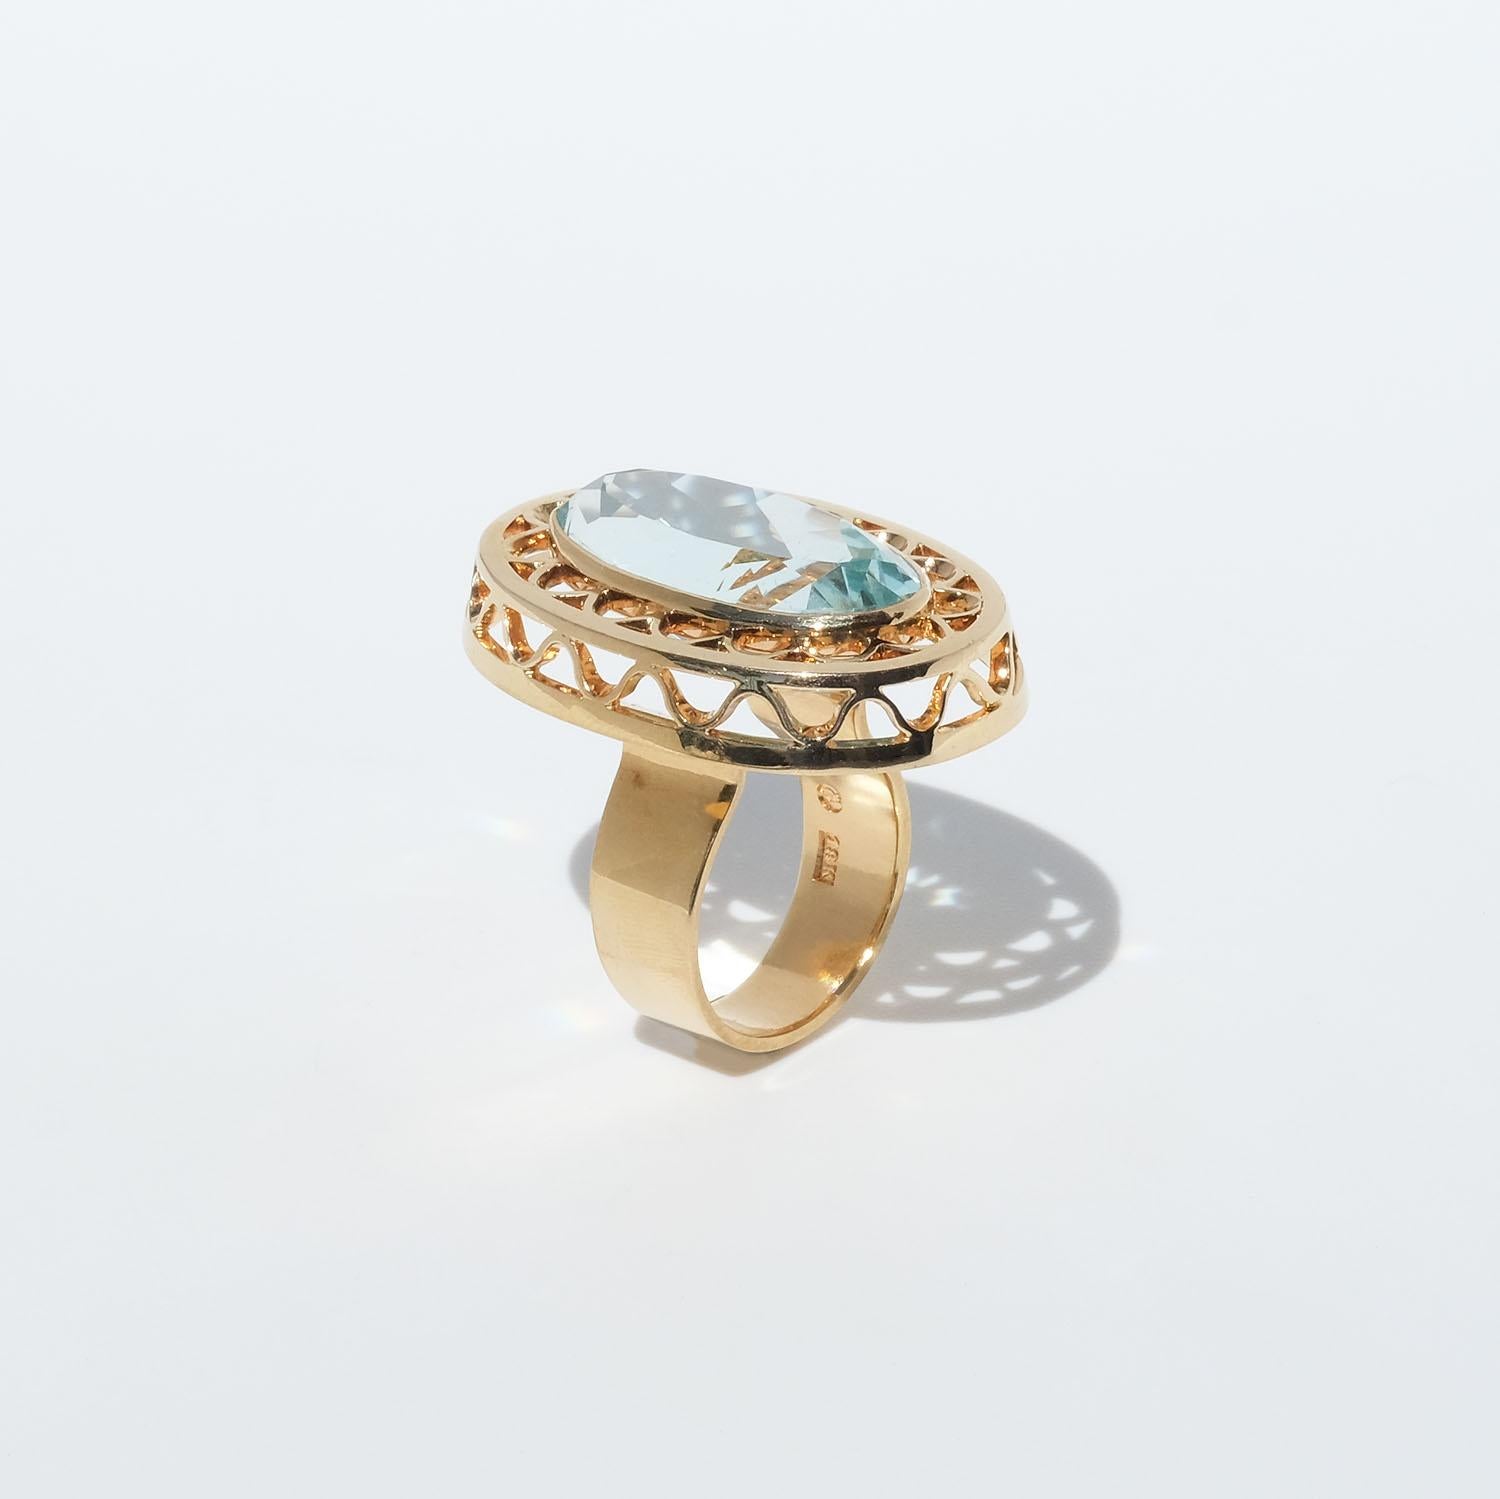 Vintage 18k Gold and Aquamarine Ring by Master Anders Högberg Year, 1977 For Sale 8